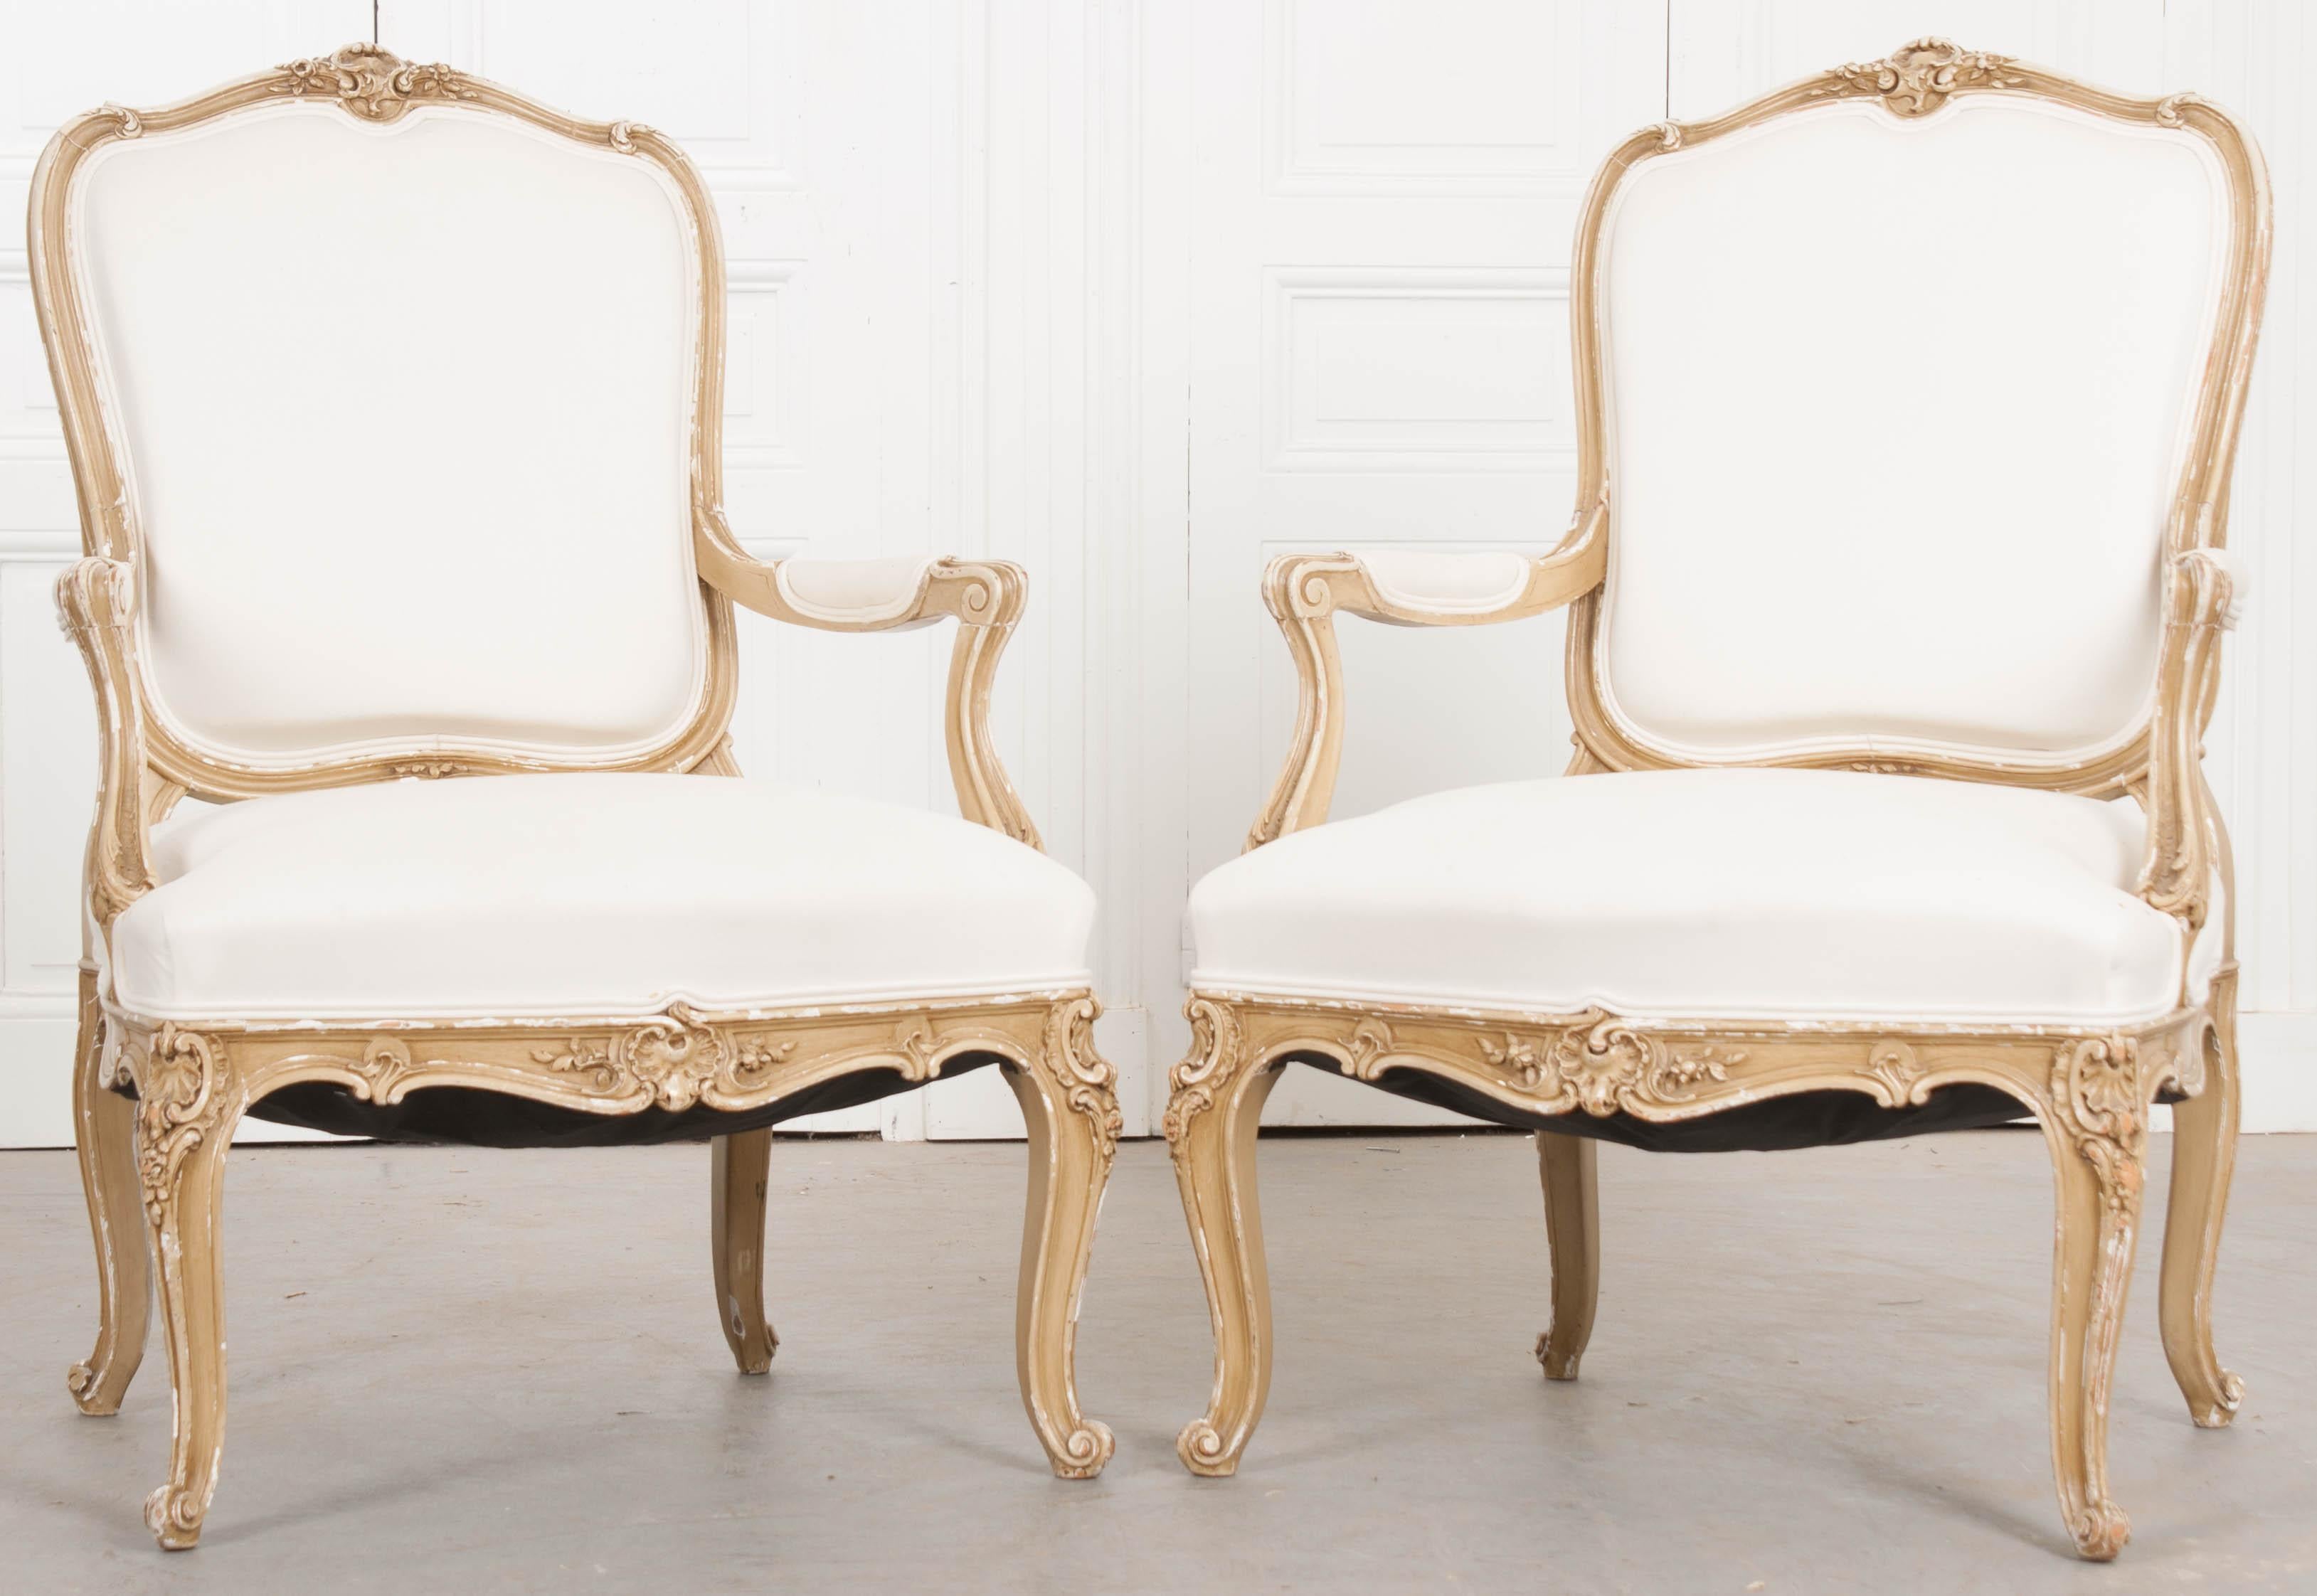 A gorgeous pair of upholstered French 19th century Louis XV style fauteuils, painted in an antique cream/taupe color. The frames are ornately decorated, with Louis XV motif carvings found all over. The pair have been more recently upholstered in an